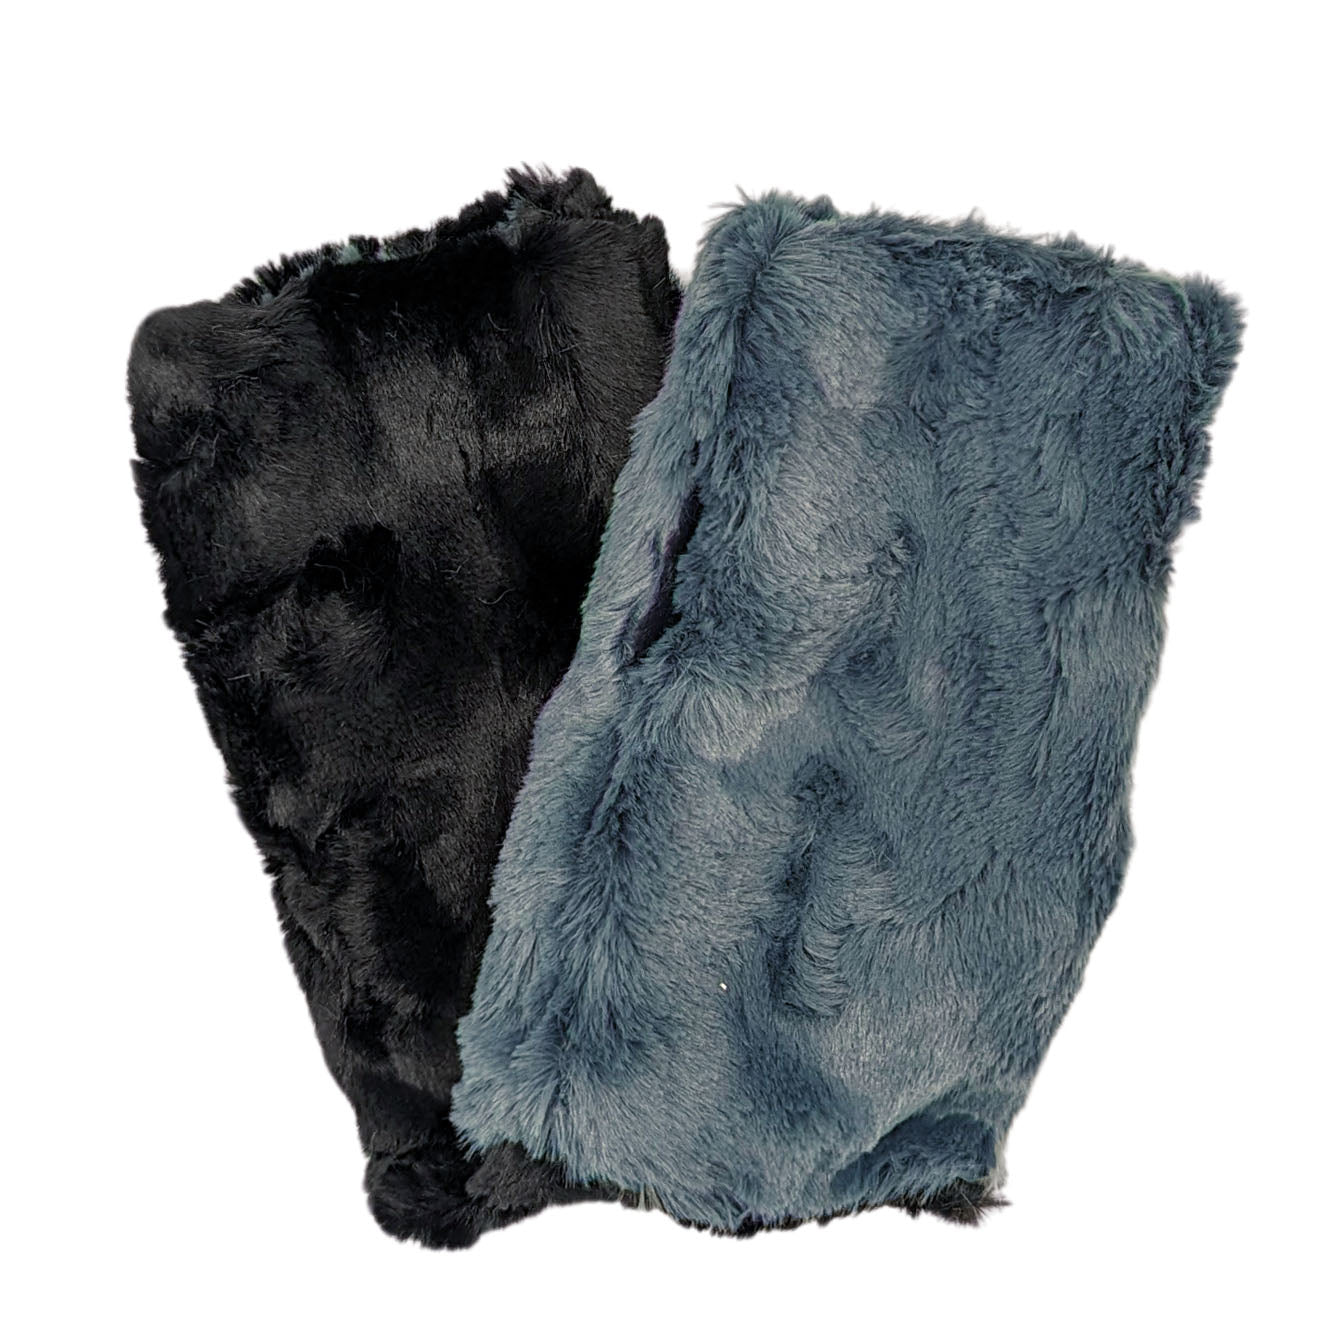 Men's Fingerless / Texting Gloves, Reversible - Cuddly Faux Fur in Slate - Handmade by Pandemonium Millinery Seattle WA USA